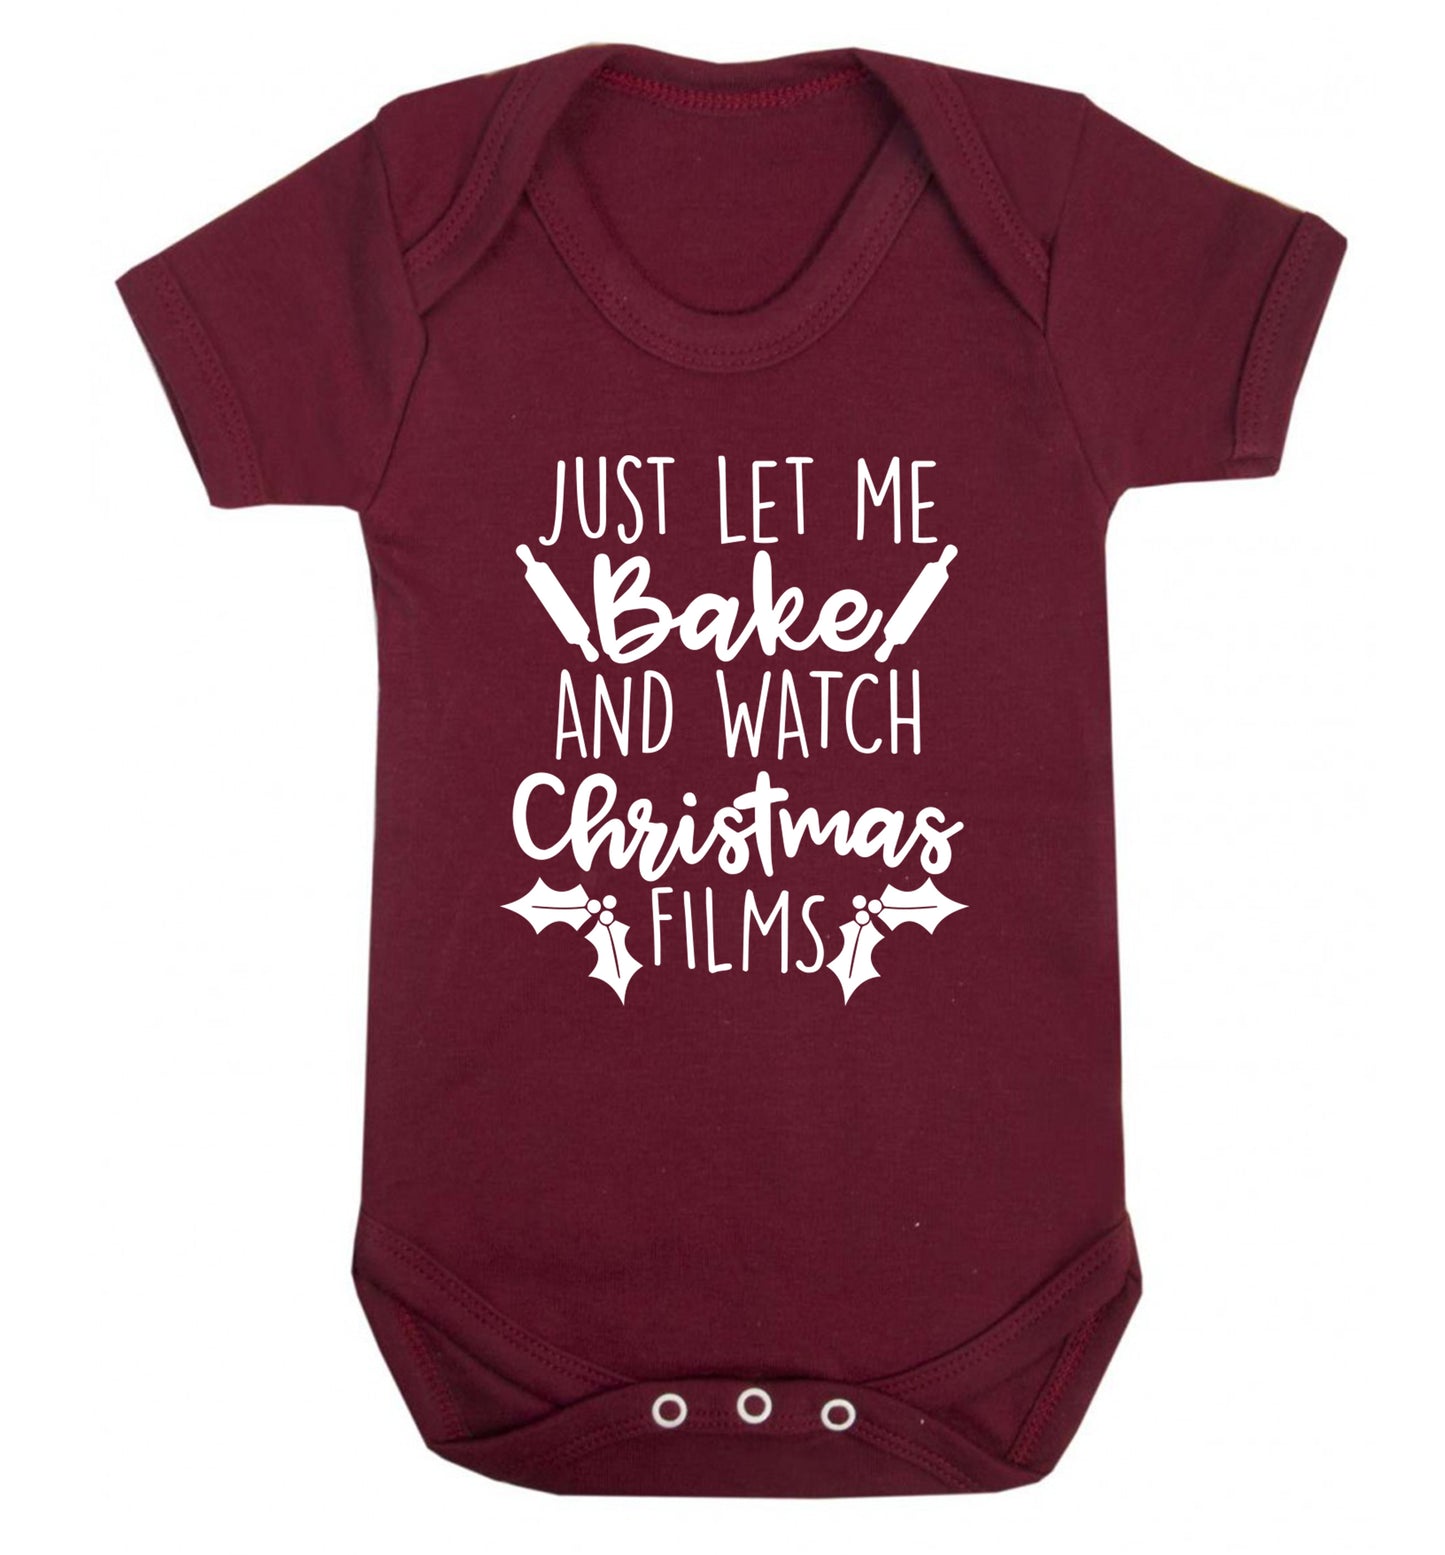 Just let me bake and watch Christmas films Baby Vest maroon 18-24 months